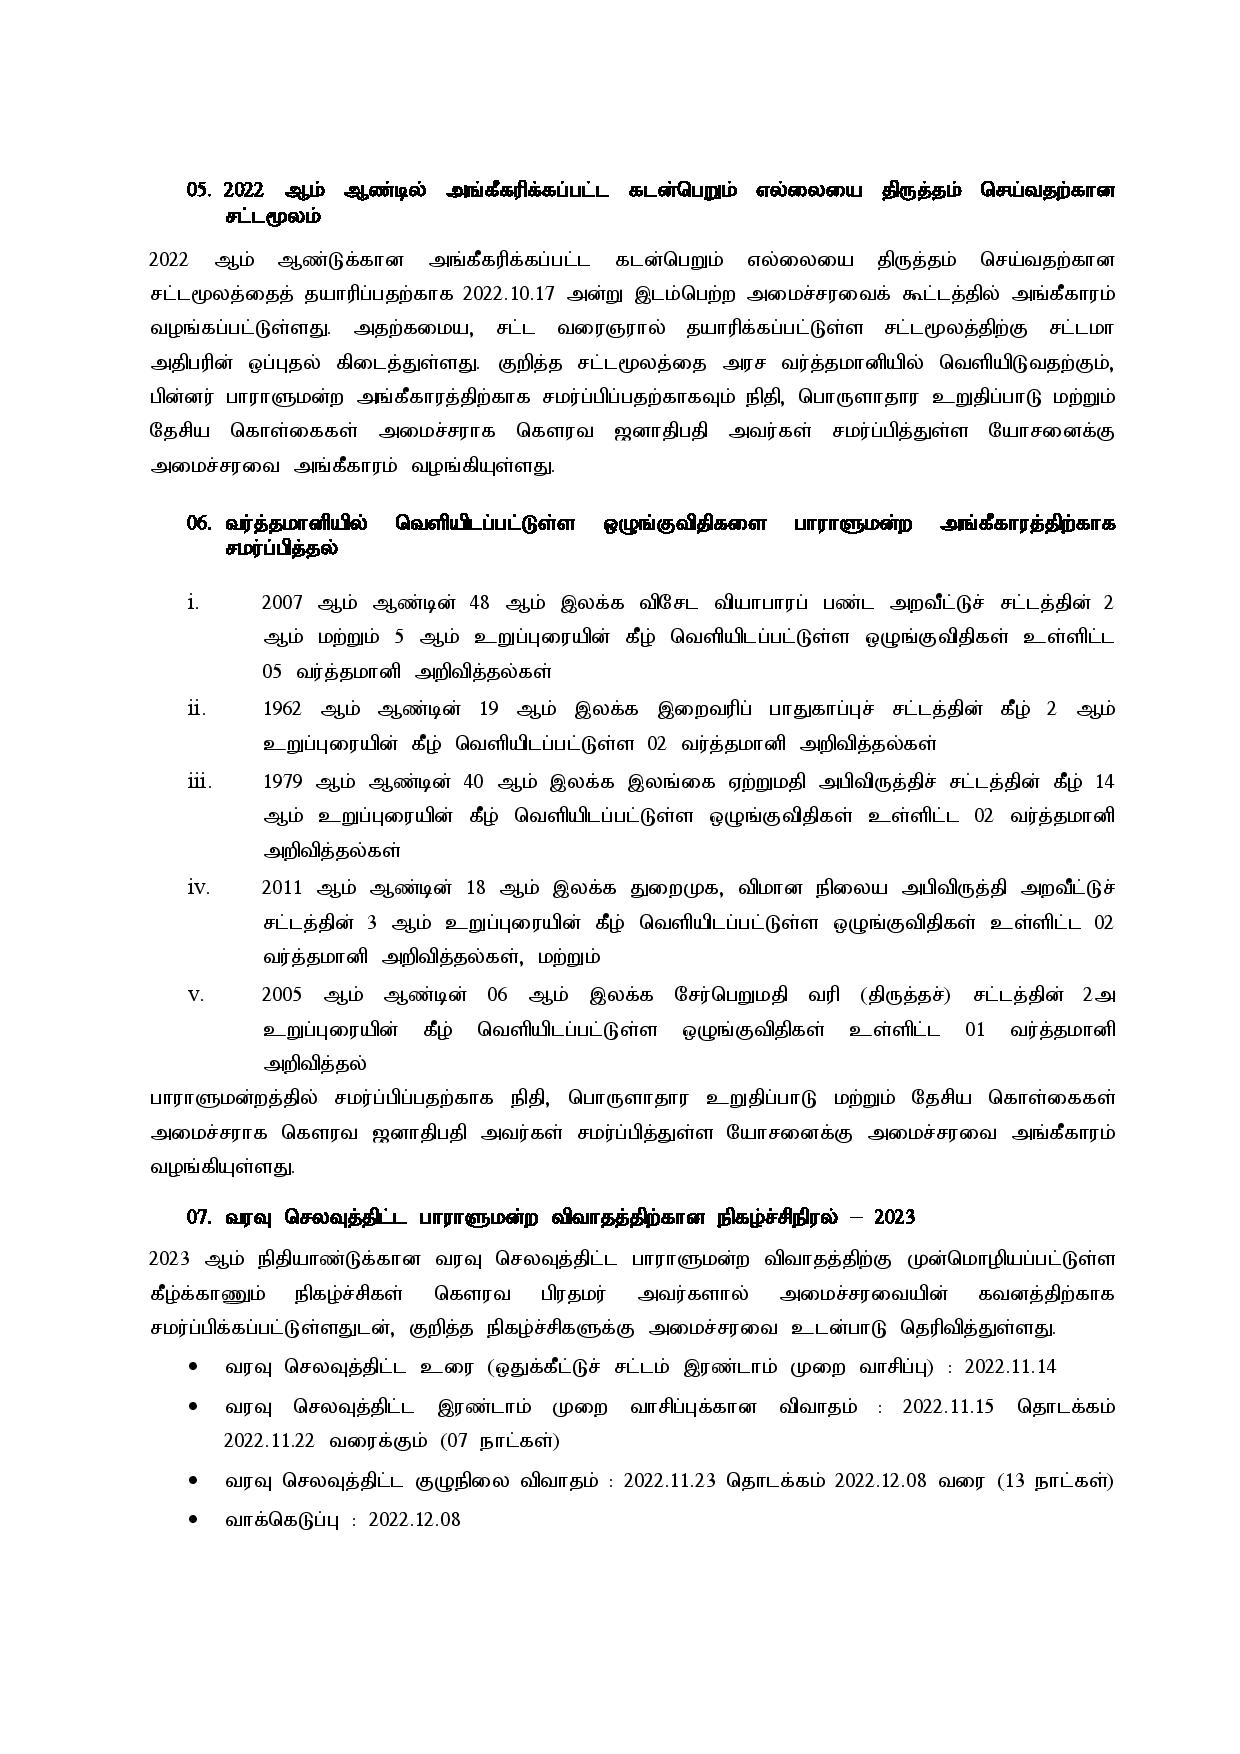 Cabinet Decisions on 31.10.2022 Tamil page 002